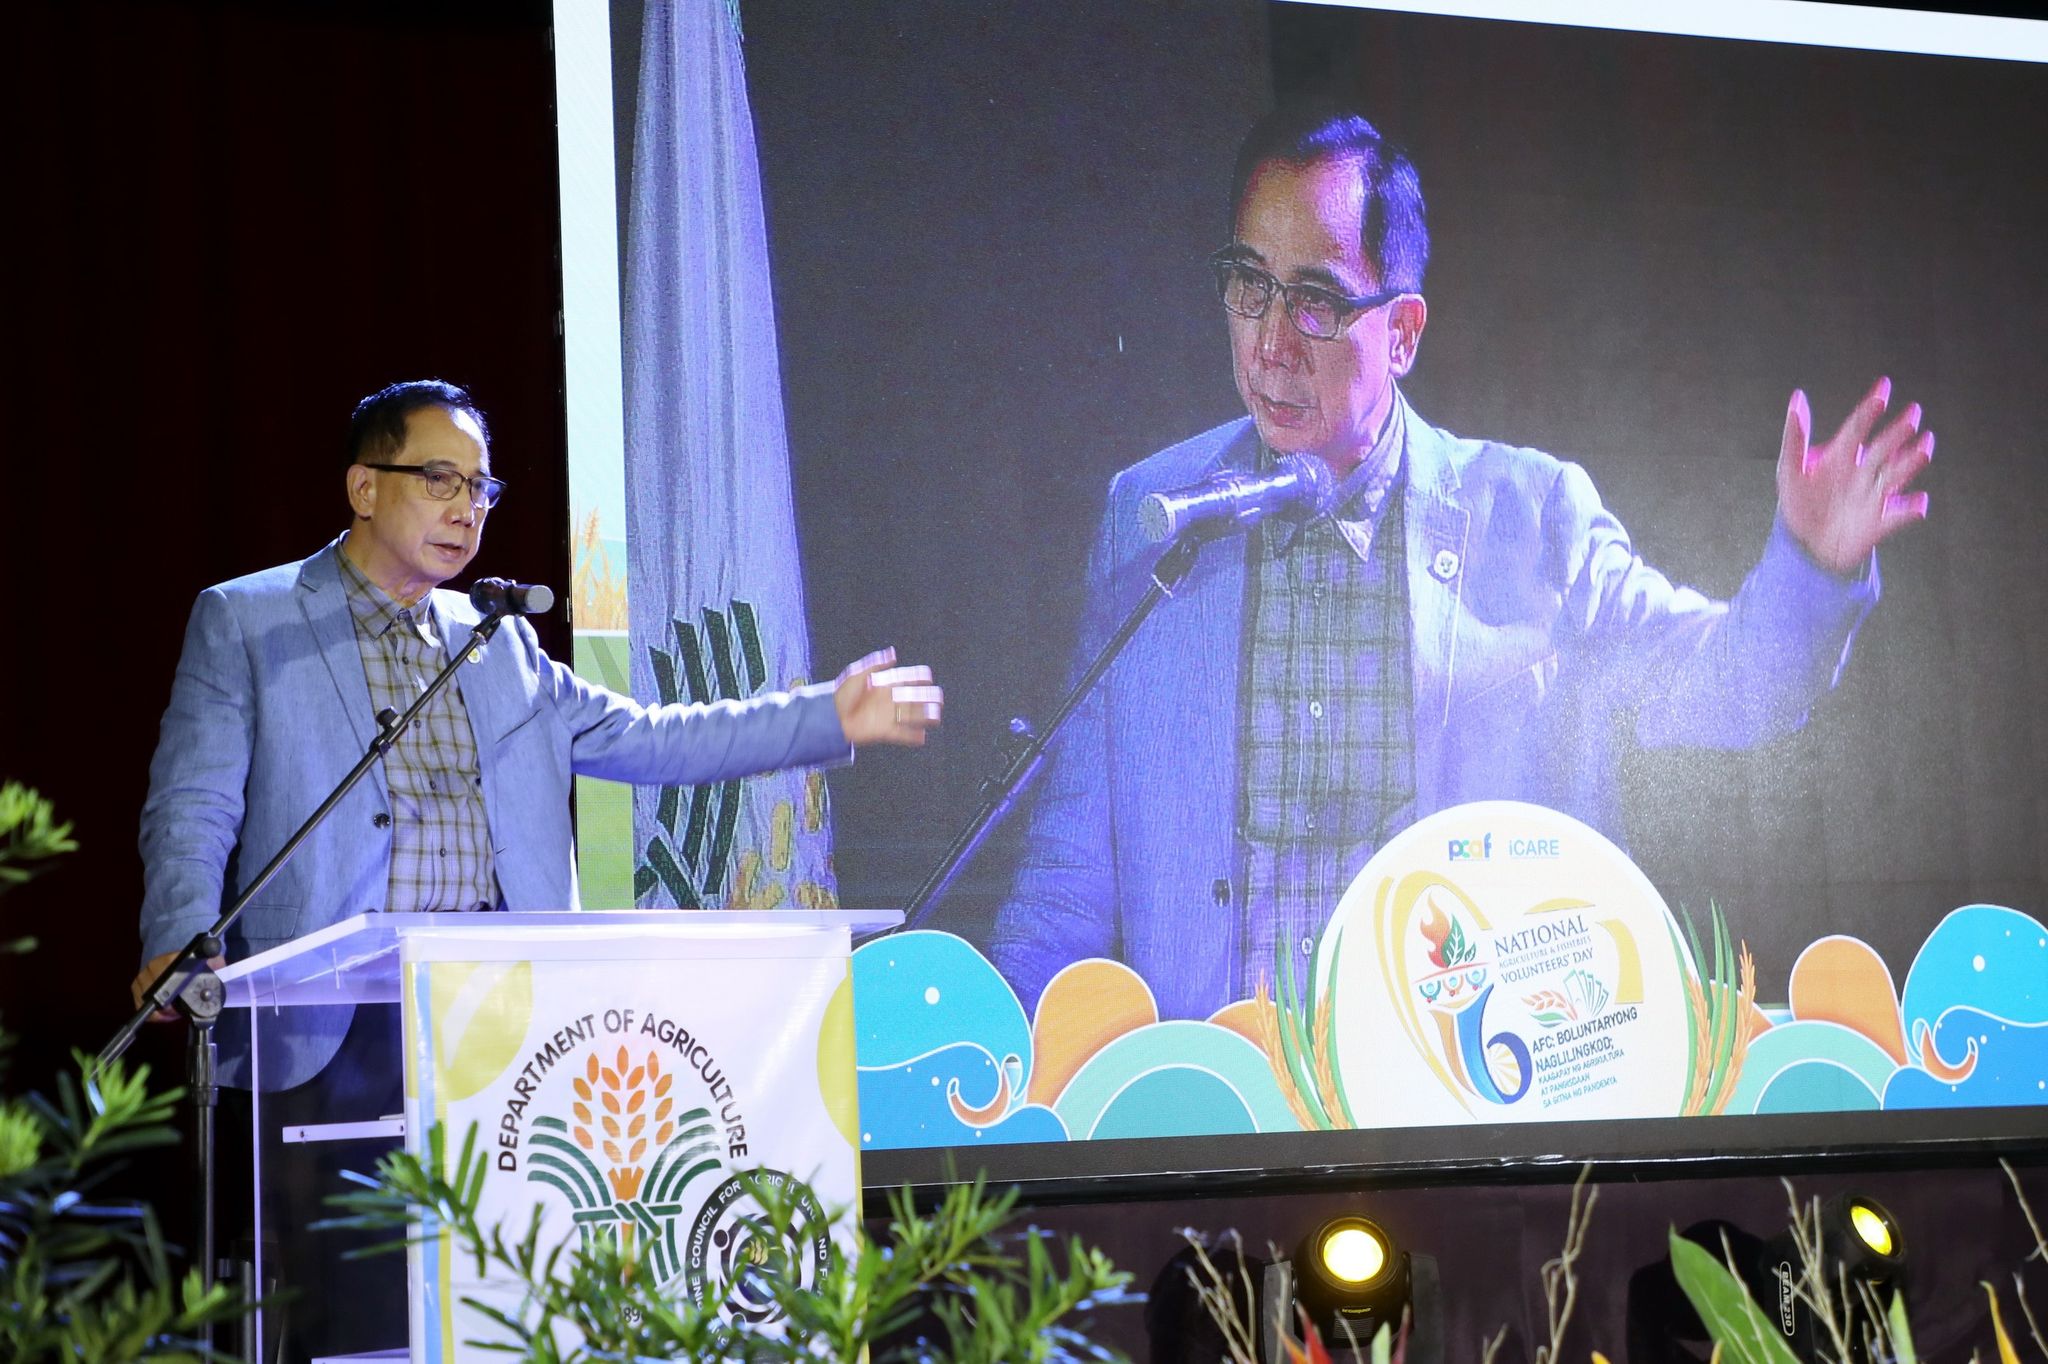 Agri chief lauds private partners’ contributions to agri-fishery growth amid ‘perfect storm’